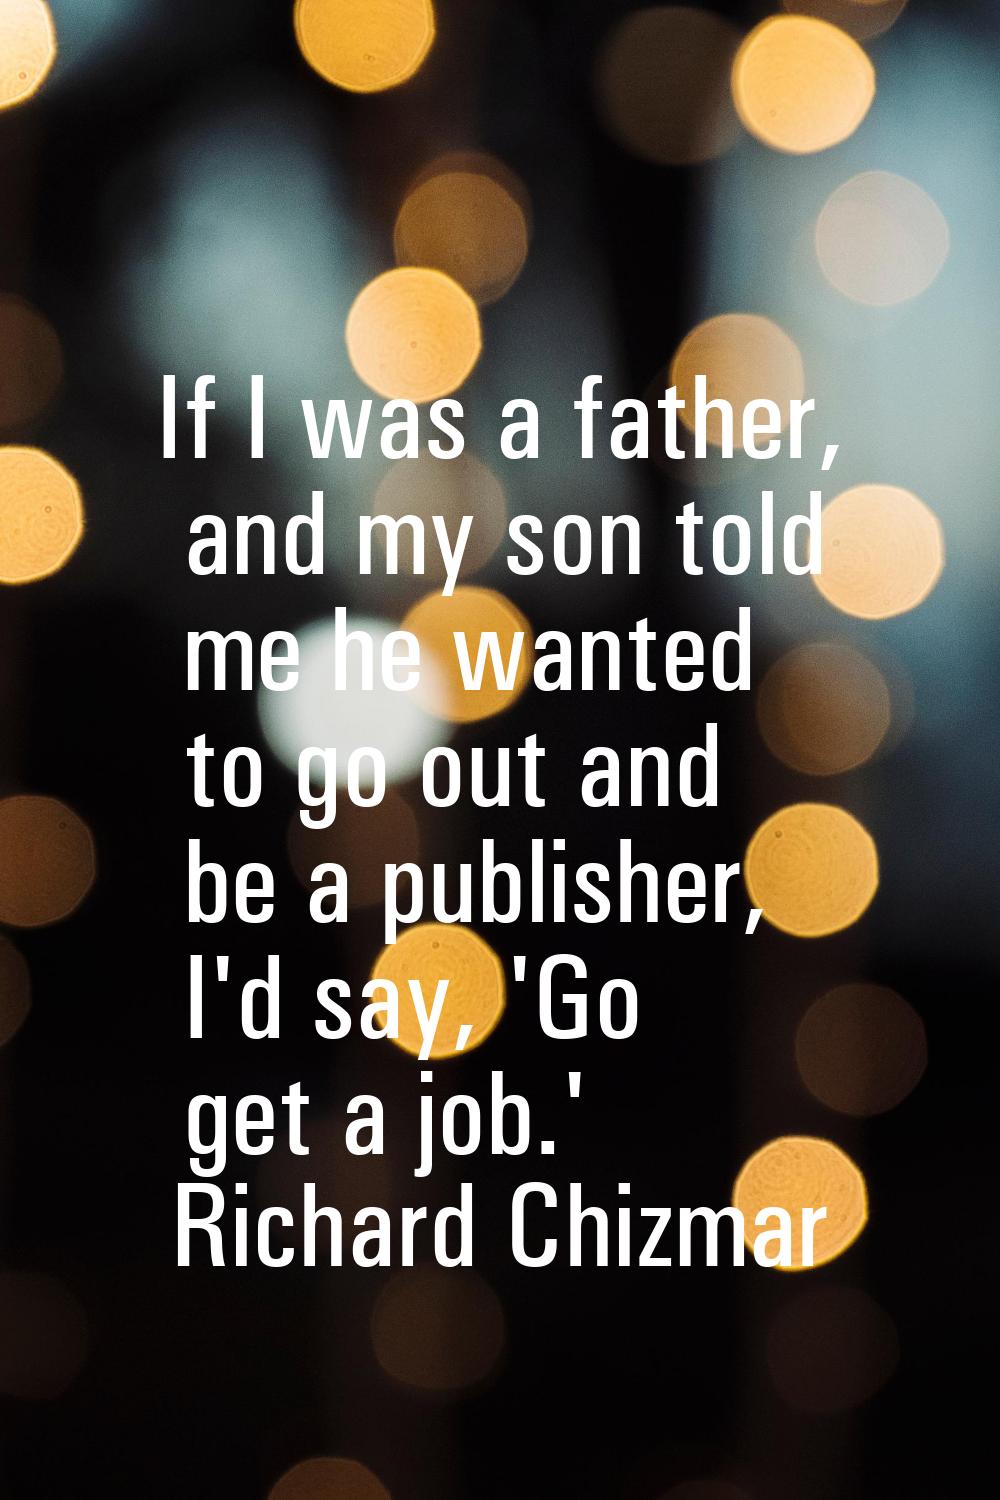 If I was a father, and my son told me he wanted to go out and be a publisher, I'd say, 'Go get a jo